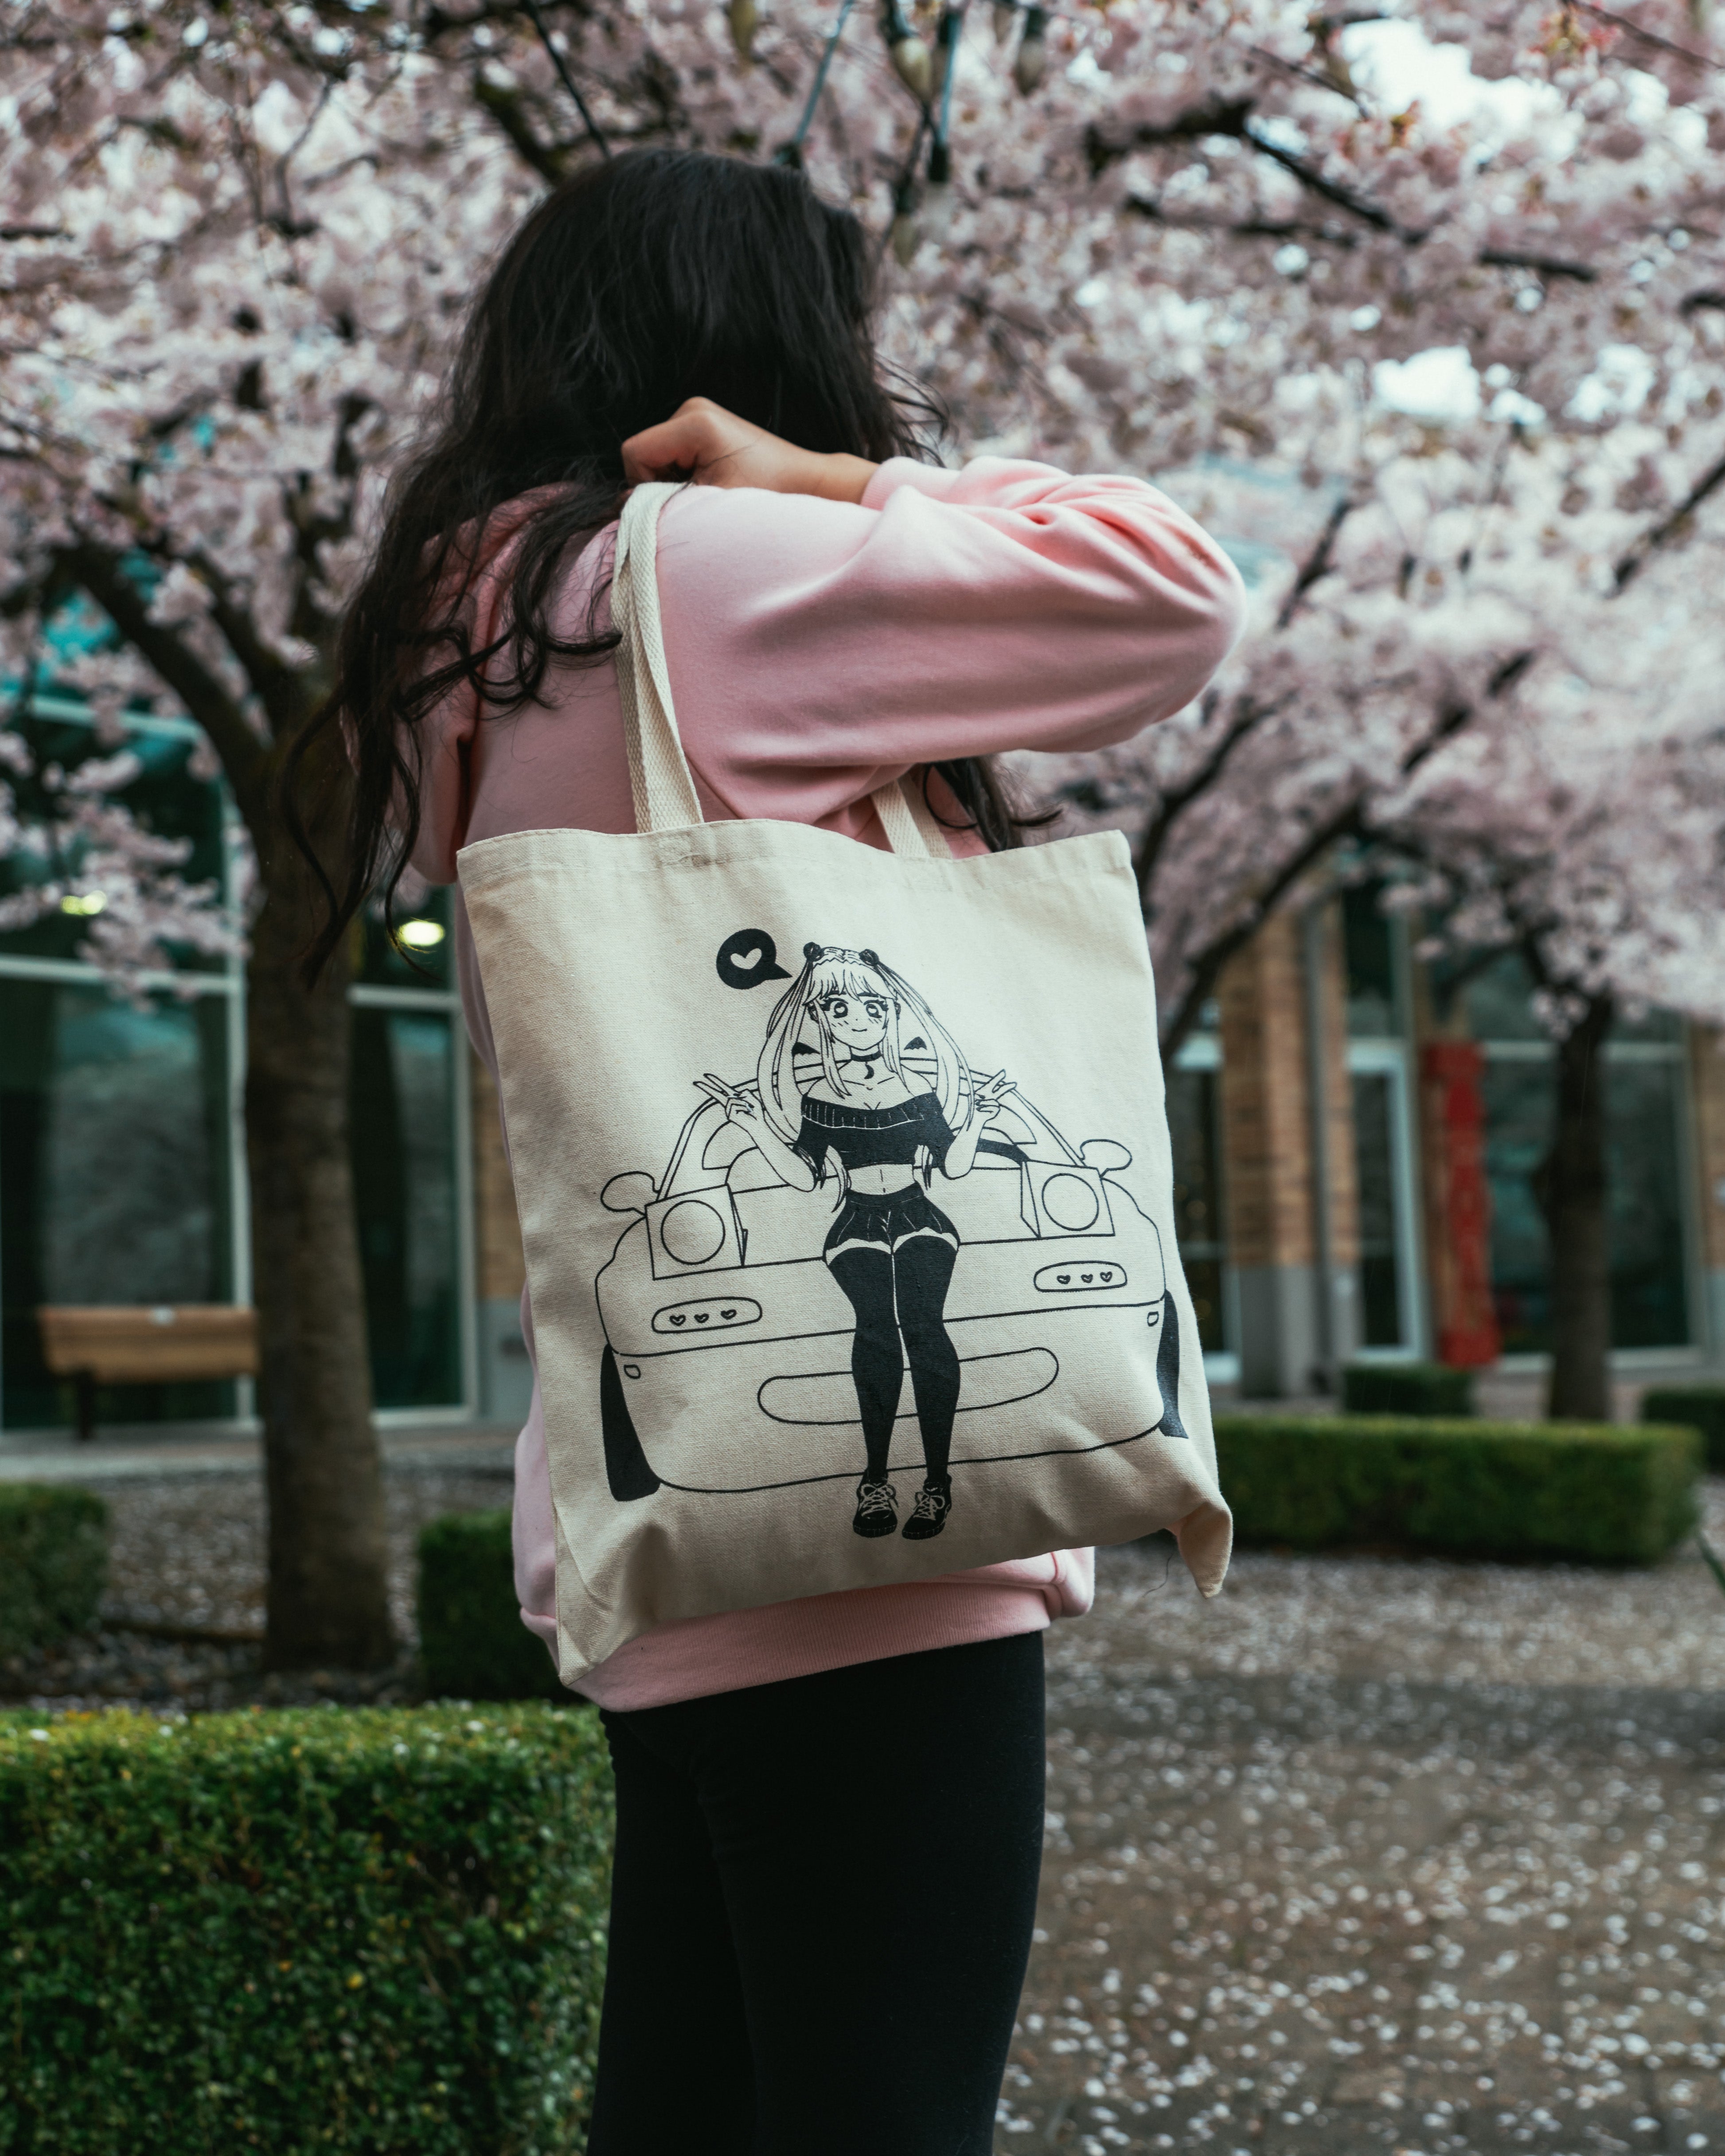 girl wearing a pink hoodie near cherry blossom trees holding a cute tote bag featuring a graphic of an anime girl that looks like sailor moon standing infront of an NA miata